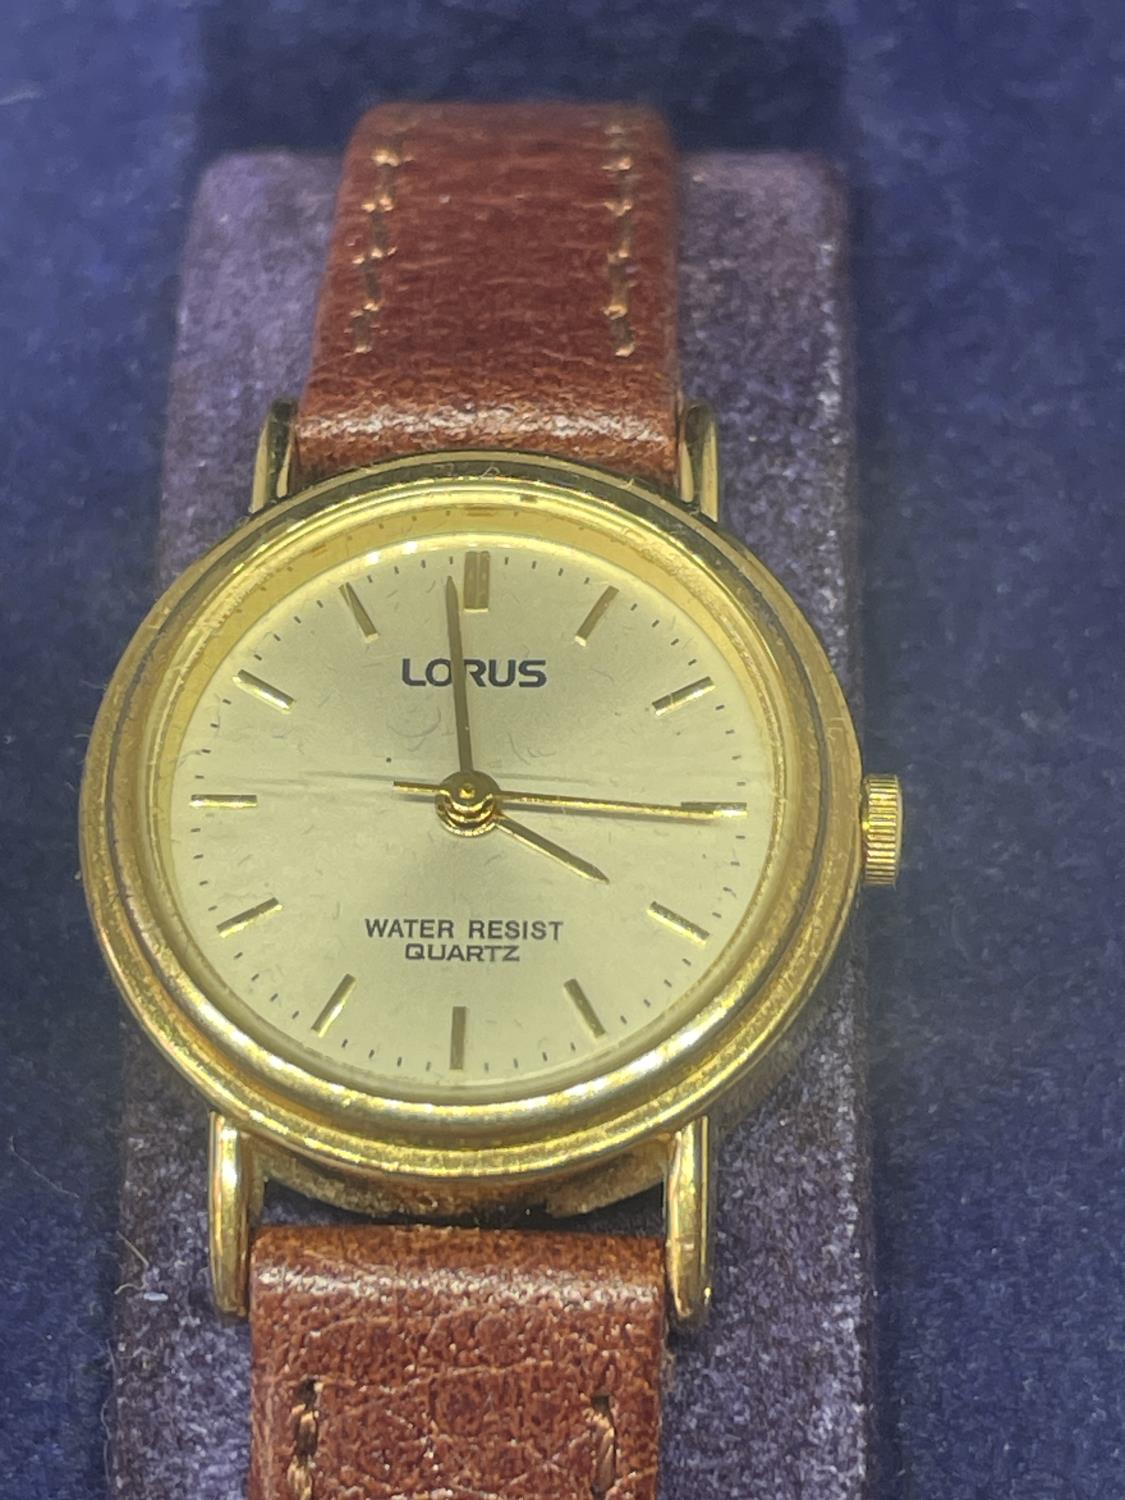 A LORUS WRIST WATCH IN A PRESENTATION BOX SEEN WORKING BUT NO WARRANTY - Image 2 of 3